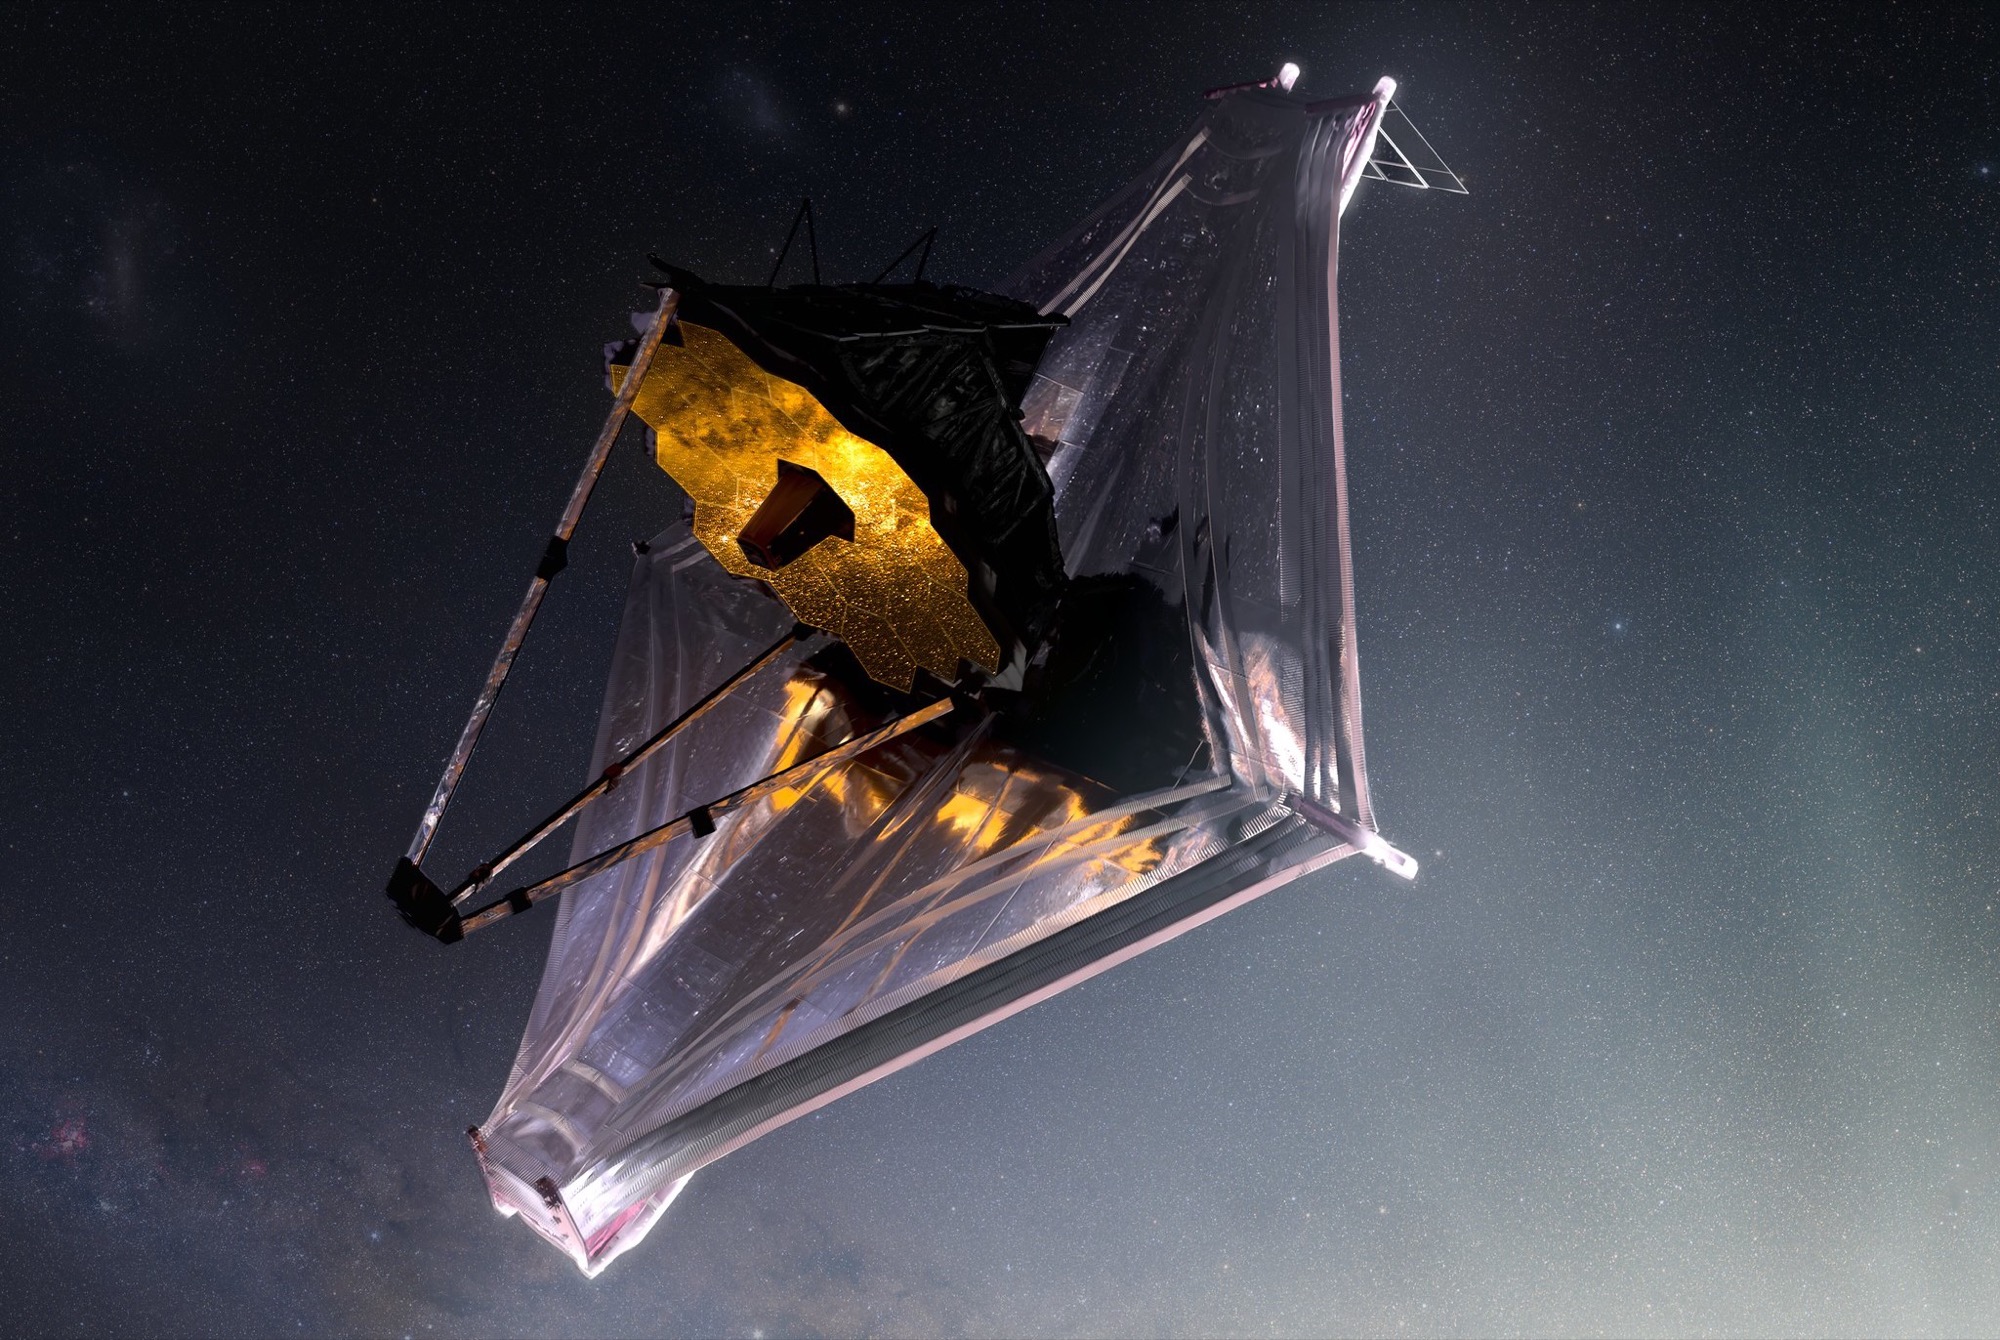 A fierce competition will decide James Webb Space Telescope’s next views of the cosmos